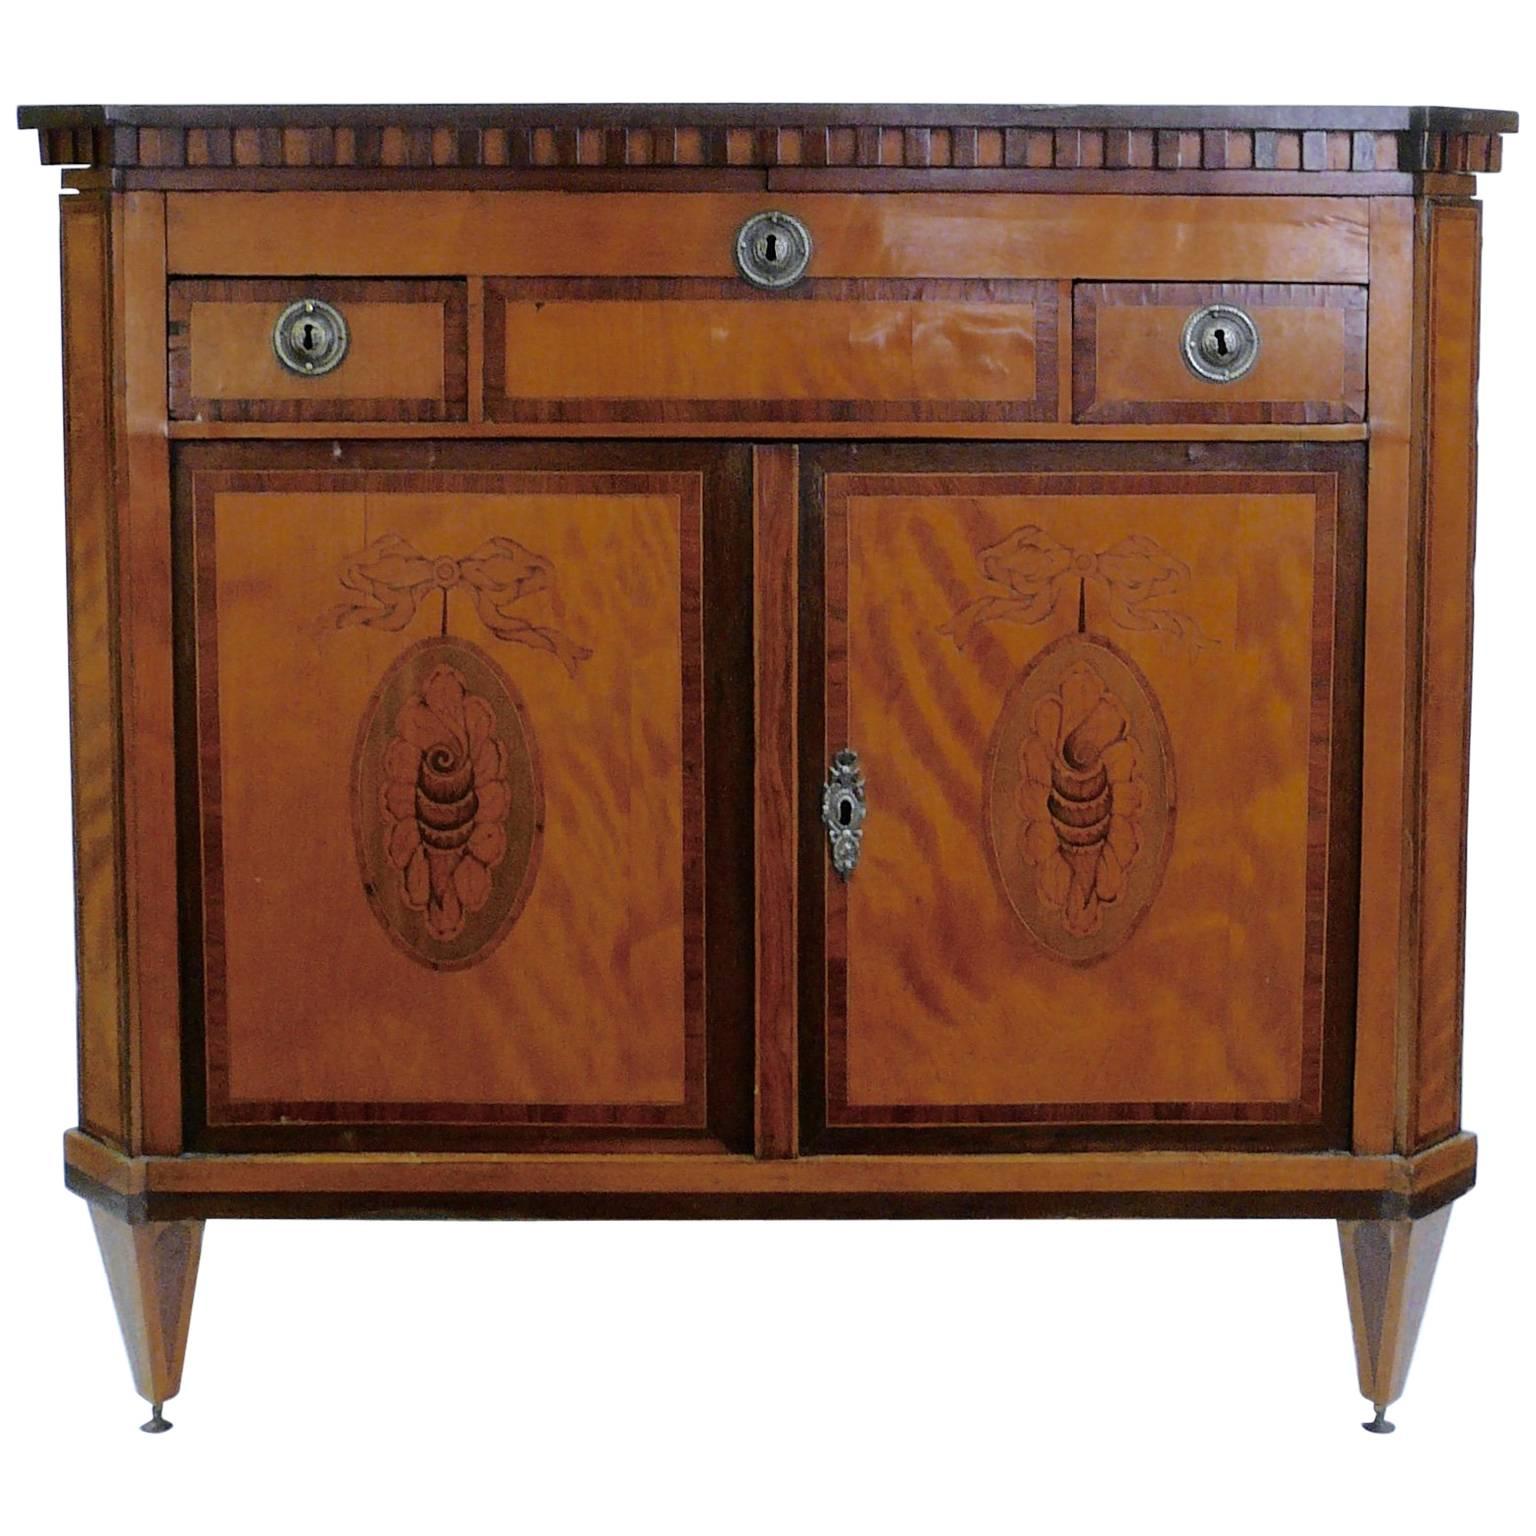 Fine Early 19th Century Dutch Inlay Commode or Klapbuffet For Sale